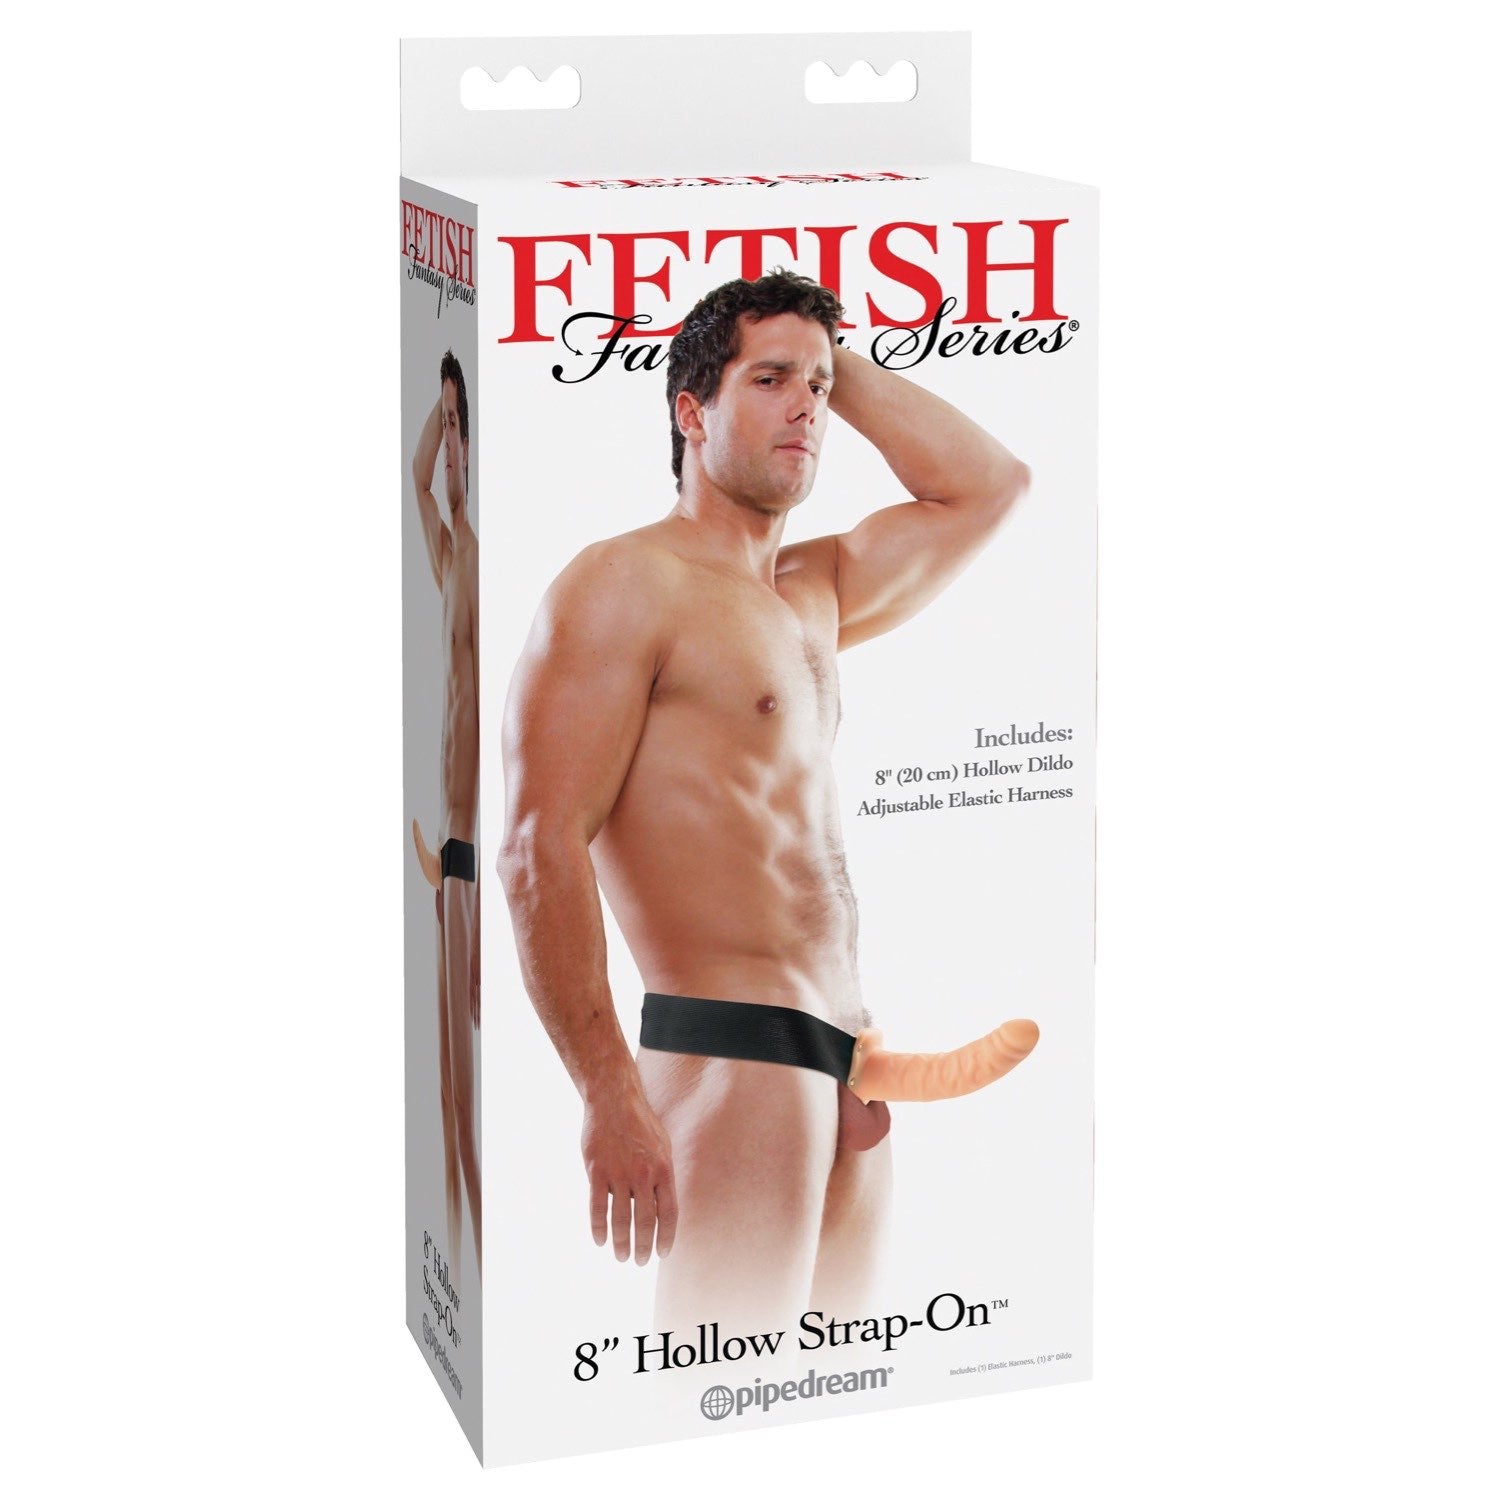 Fetish Fantasy Series 8&quot; Hollow Strap-On - Flesh 20 cm (8&quot;) Hollow Strap-On by Pipedream